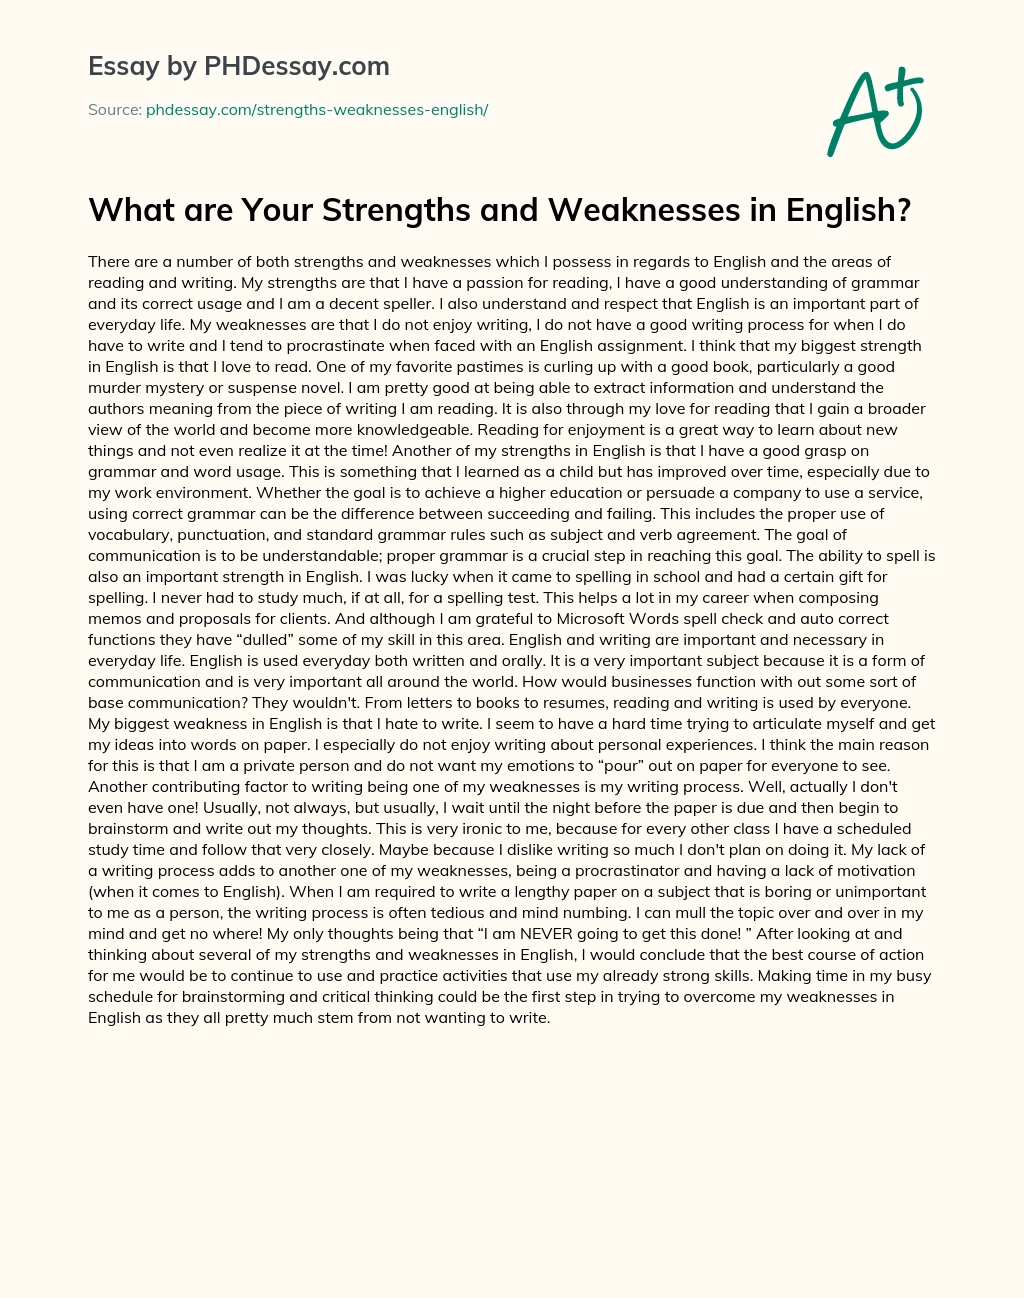 how to write an essay about my strengths and weaknesses